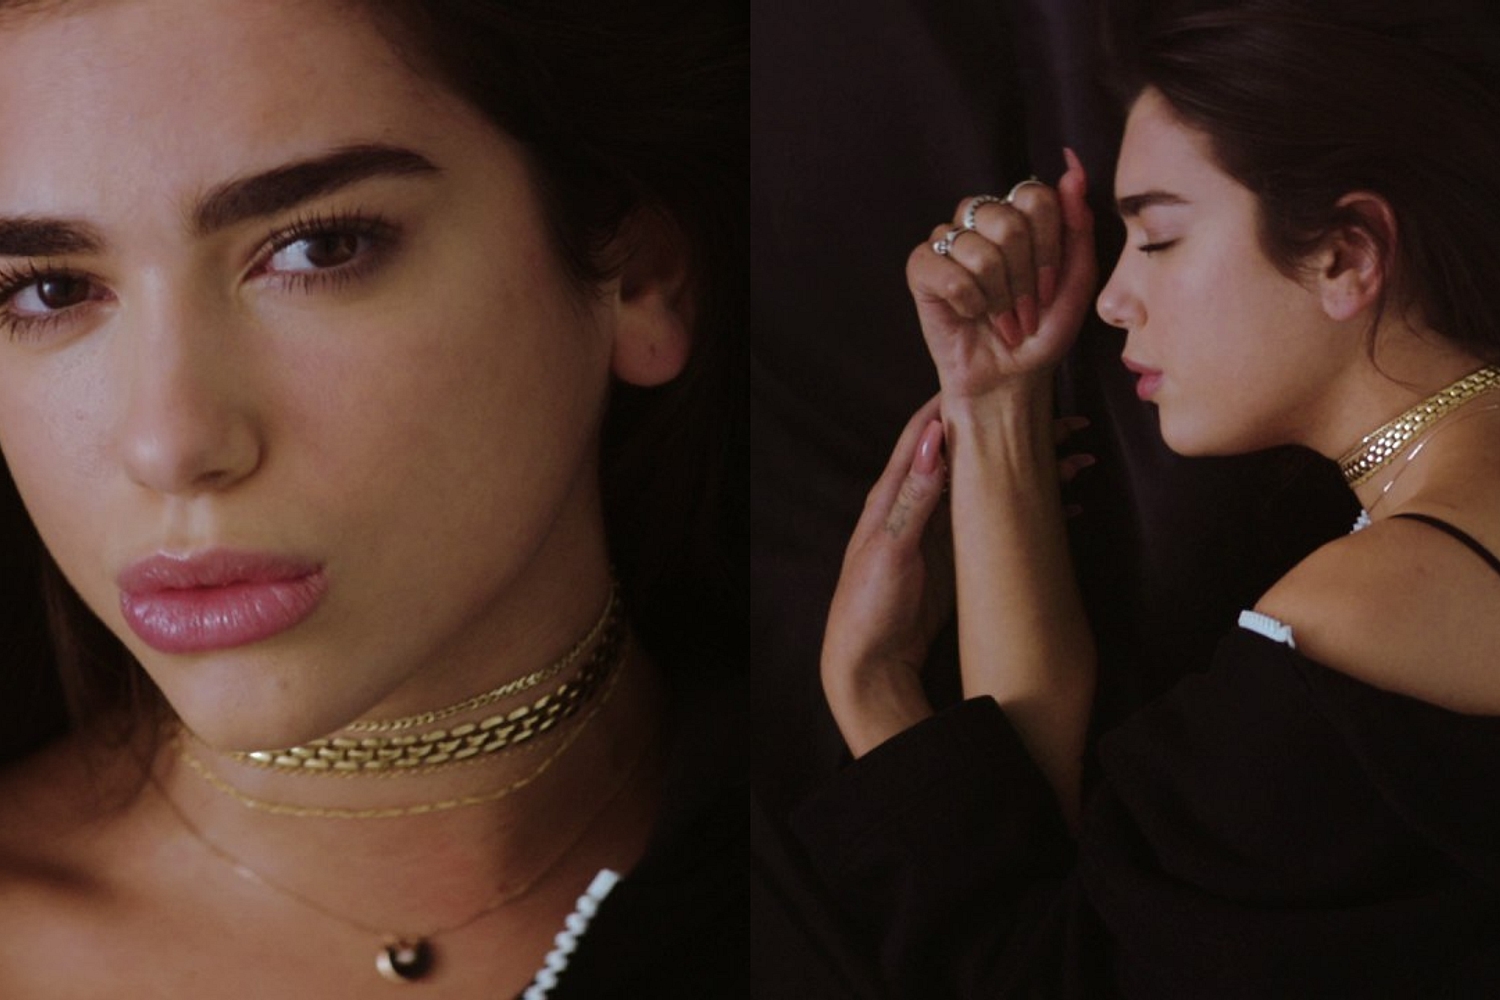 Dua Lipa sees double in ‘Thinkin ‘Bout You’ video